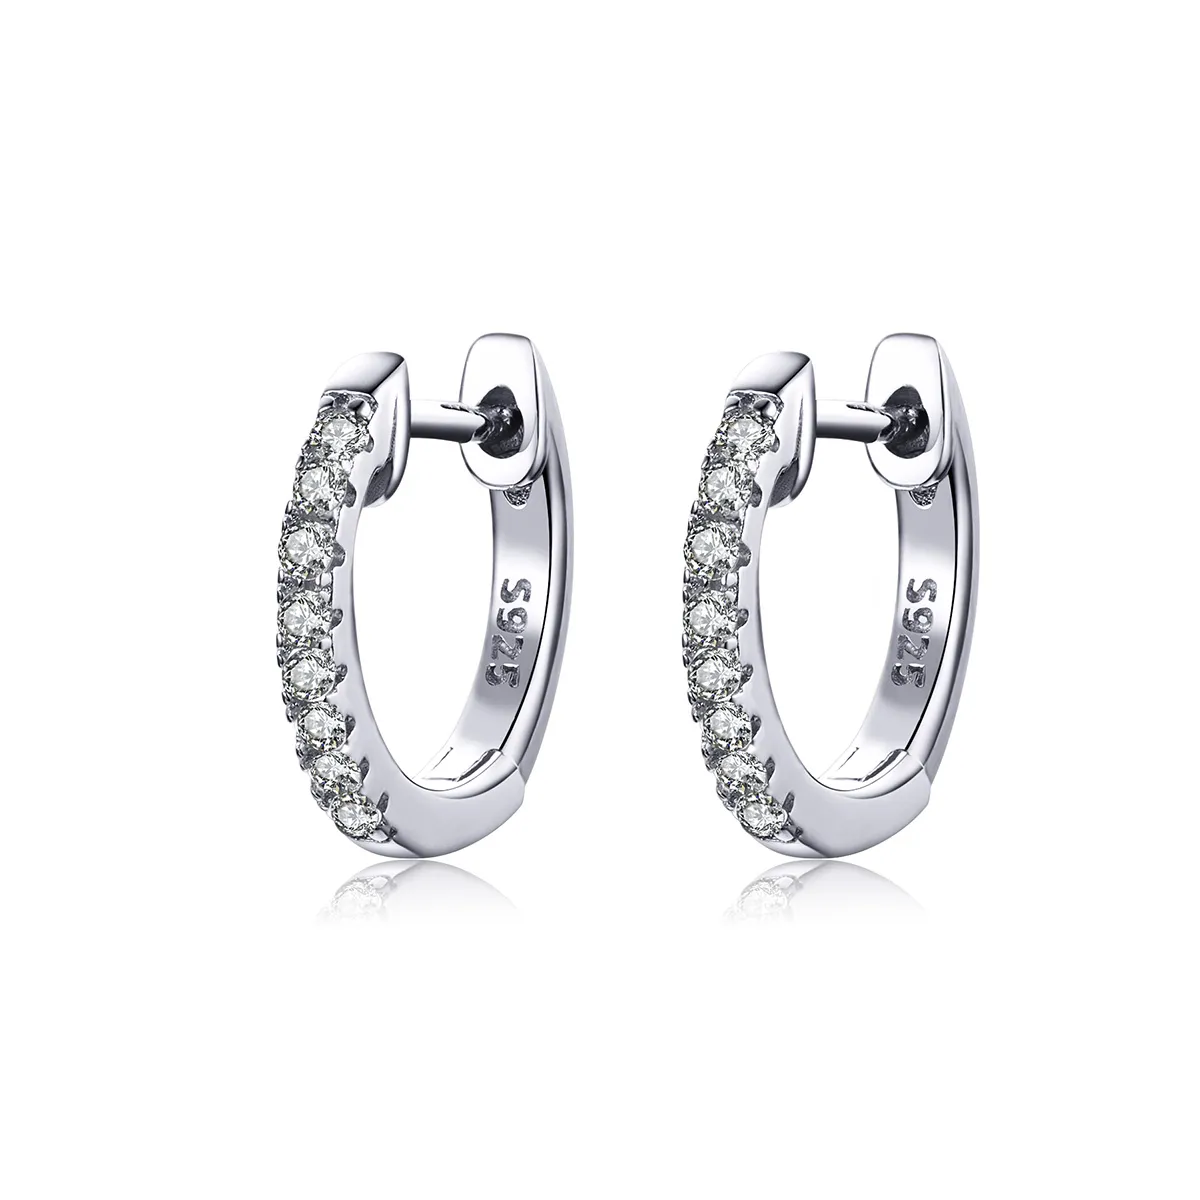 Pandora Style Silver Small Circle Hoop Earrings - SCE498-A